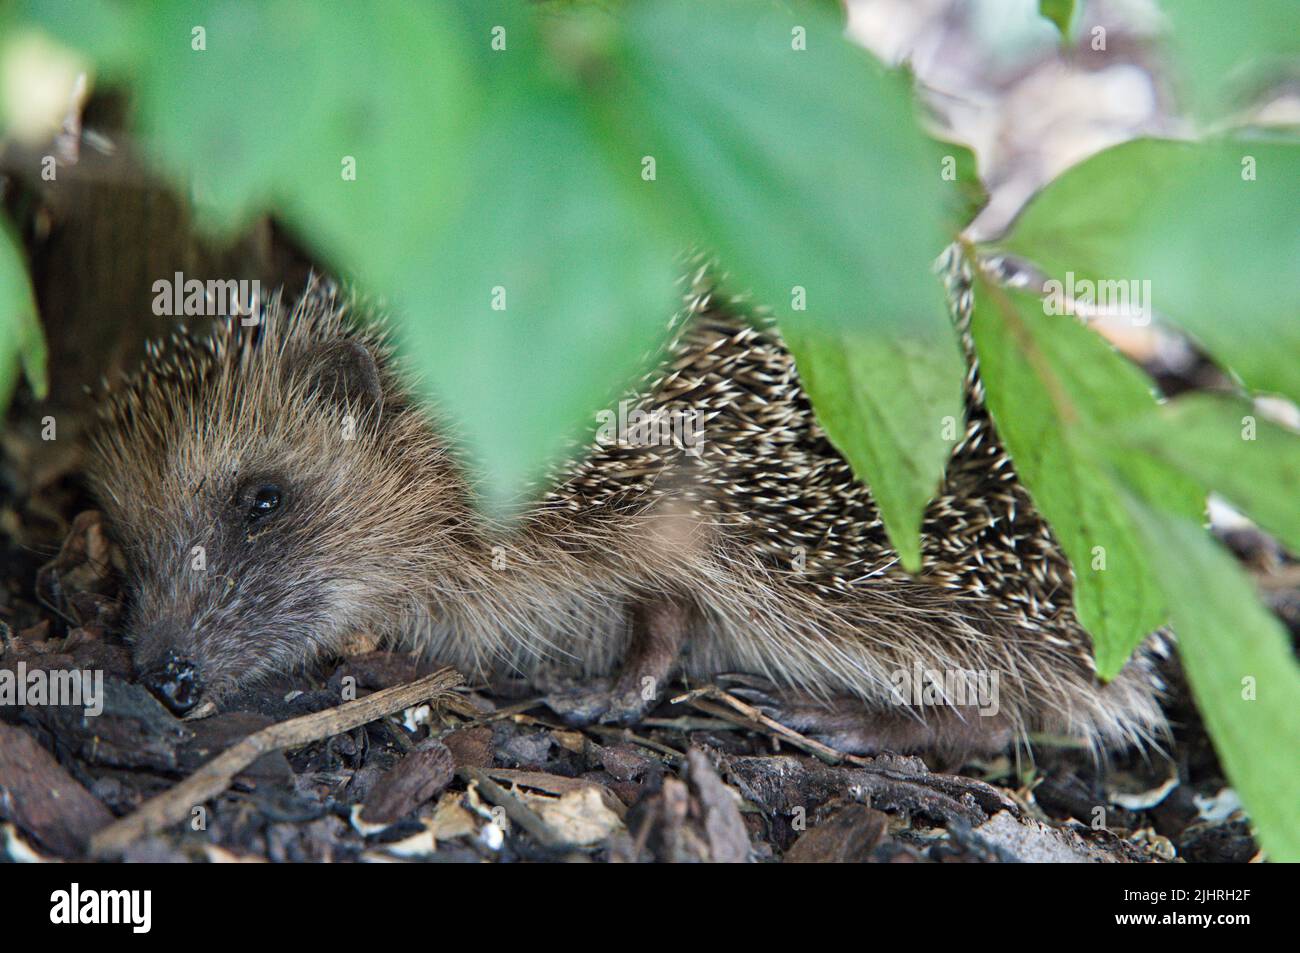 Hedgehog searching shadow in the noonday heat Stock Photo